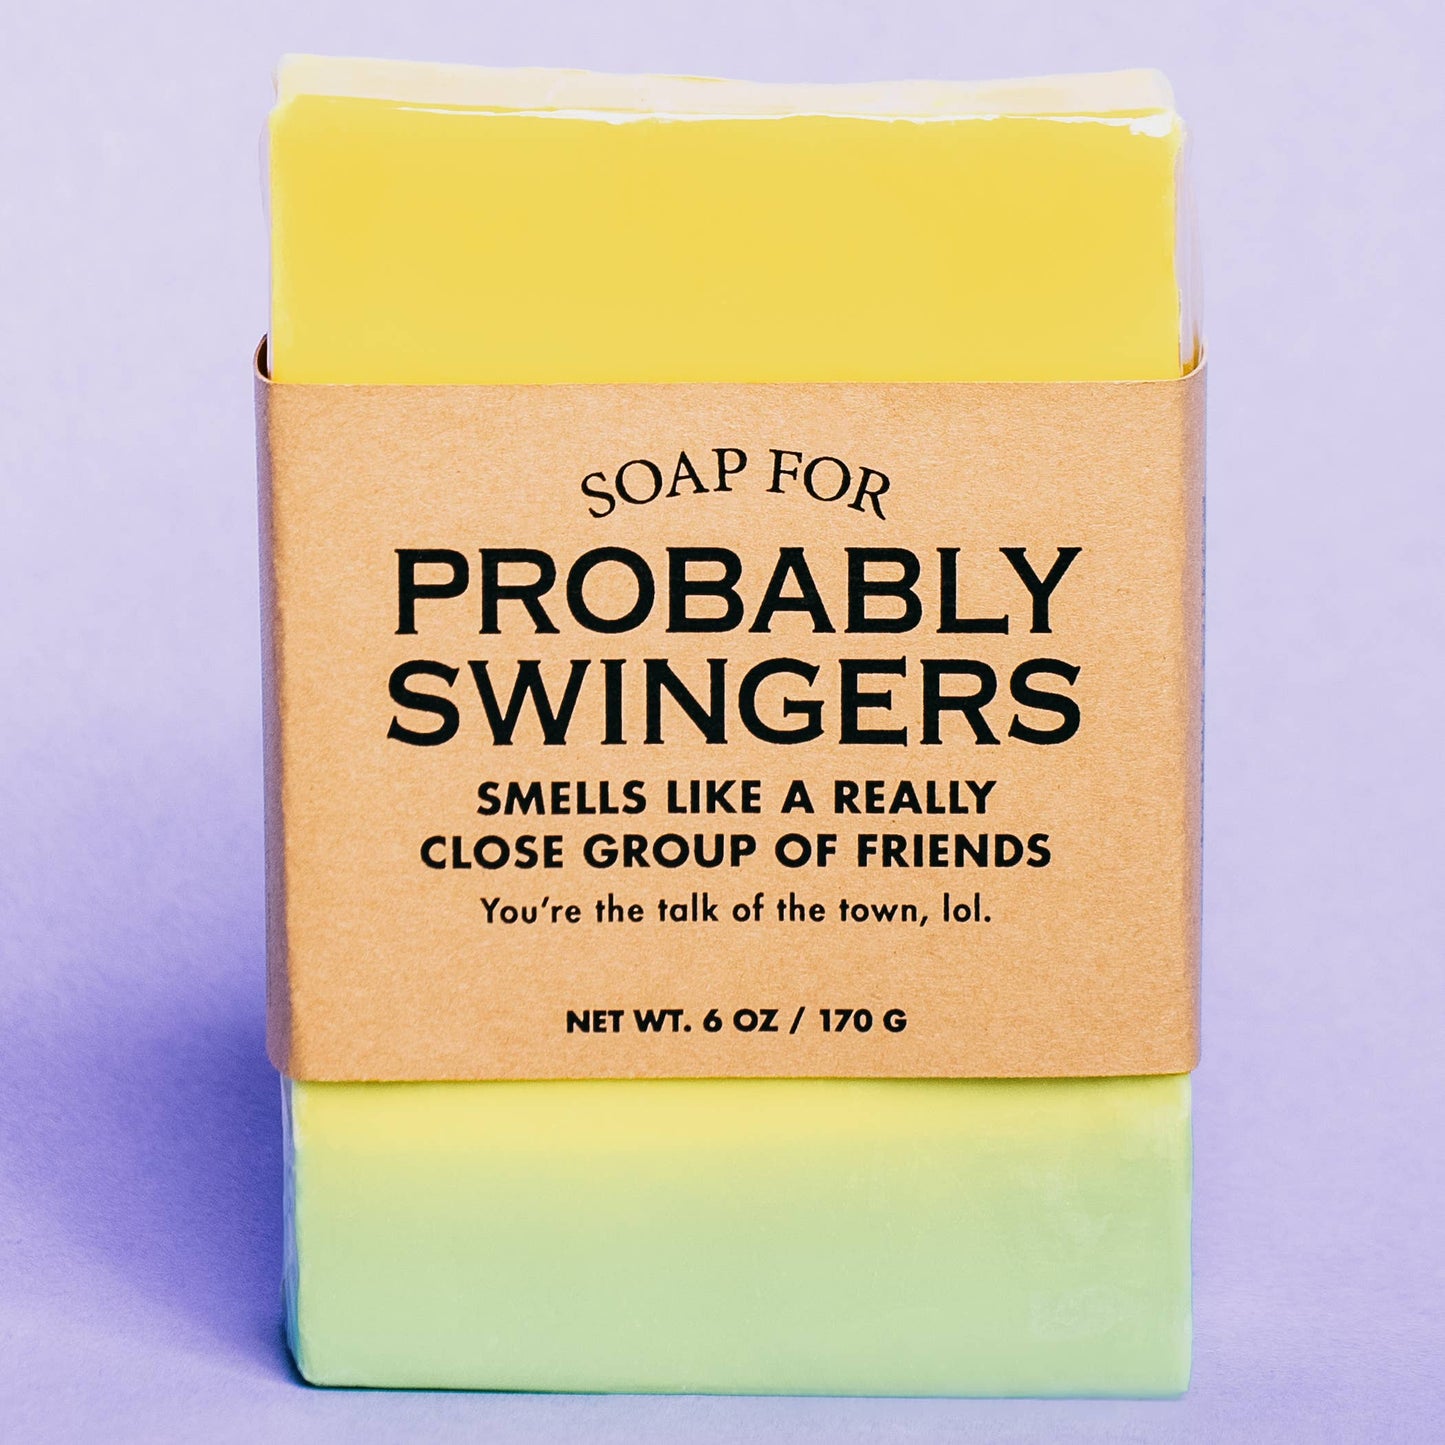 A Soap for Probably Swingers | Funny Soap | Stocking Stuffer